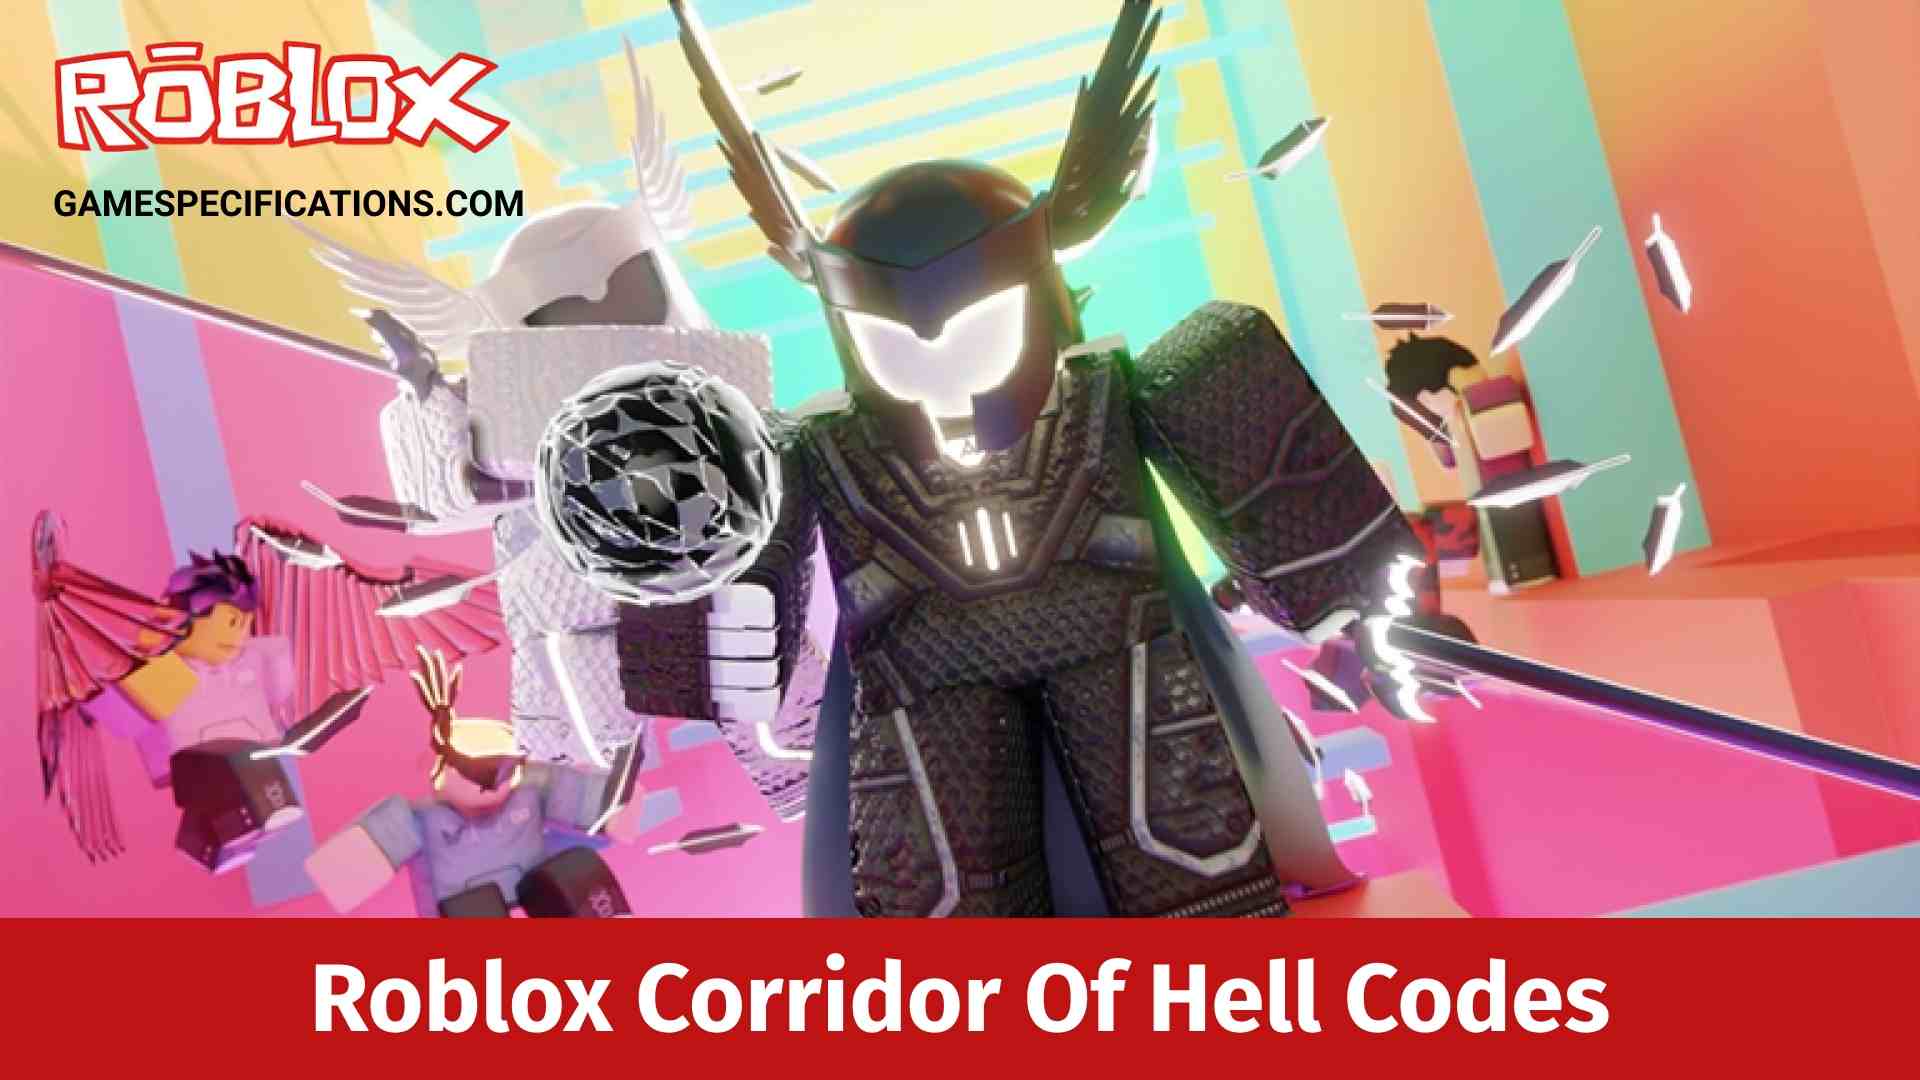 Roblox Corridor Of Hell Codes July 2021 Game Specifications - roblox song id hell no